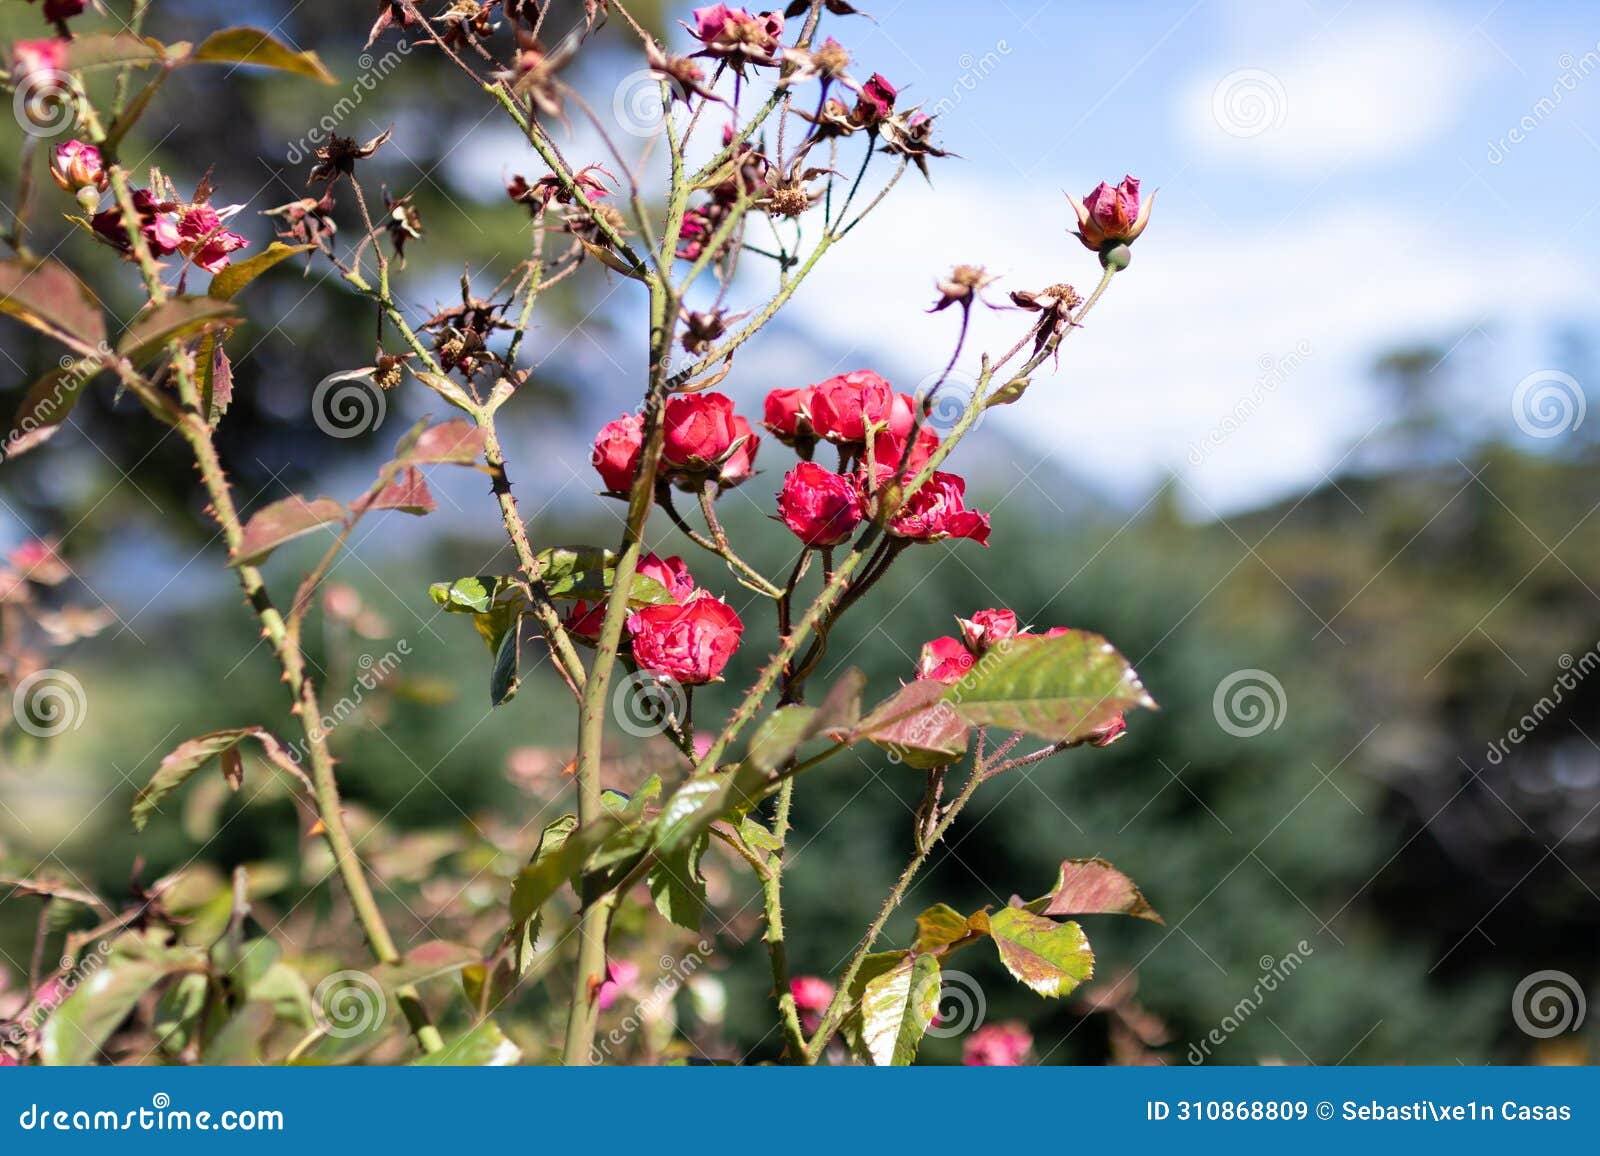 bush of pink fucsia flowers